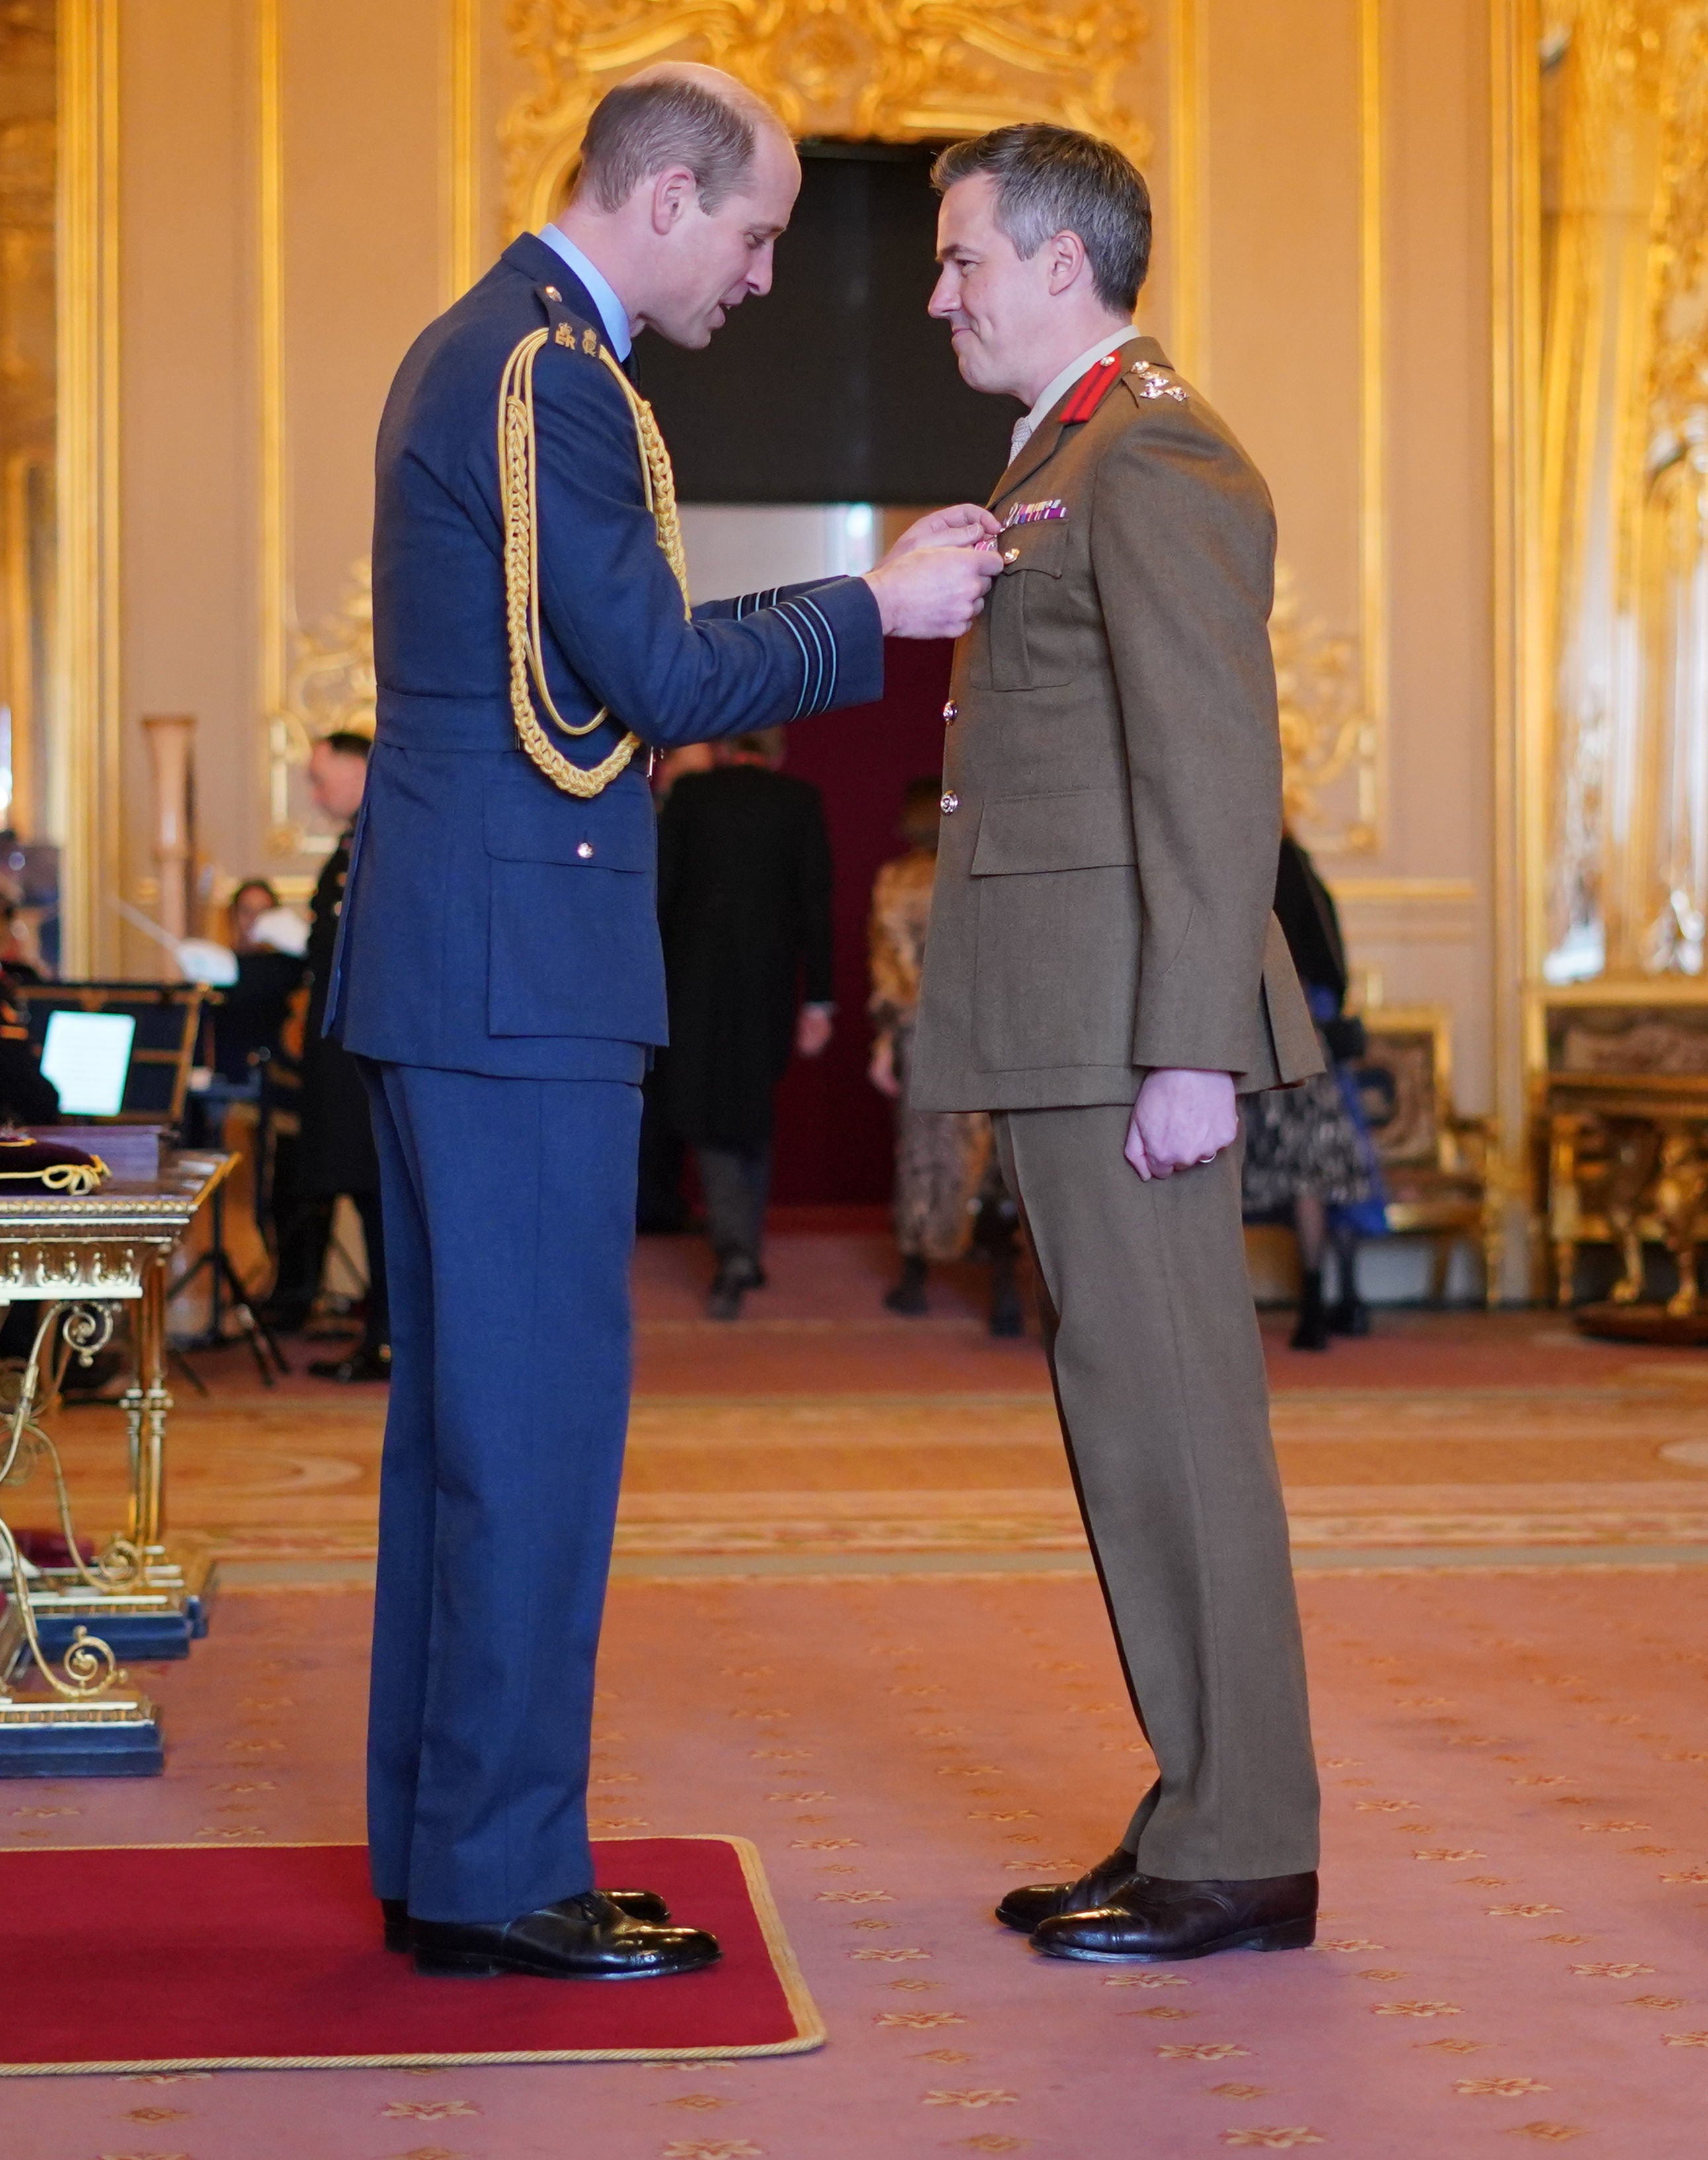 Brigadier Tobias Lambert is made an Officer of the Order of the British Empire by the Prince of Wales at Windsor Castle